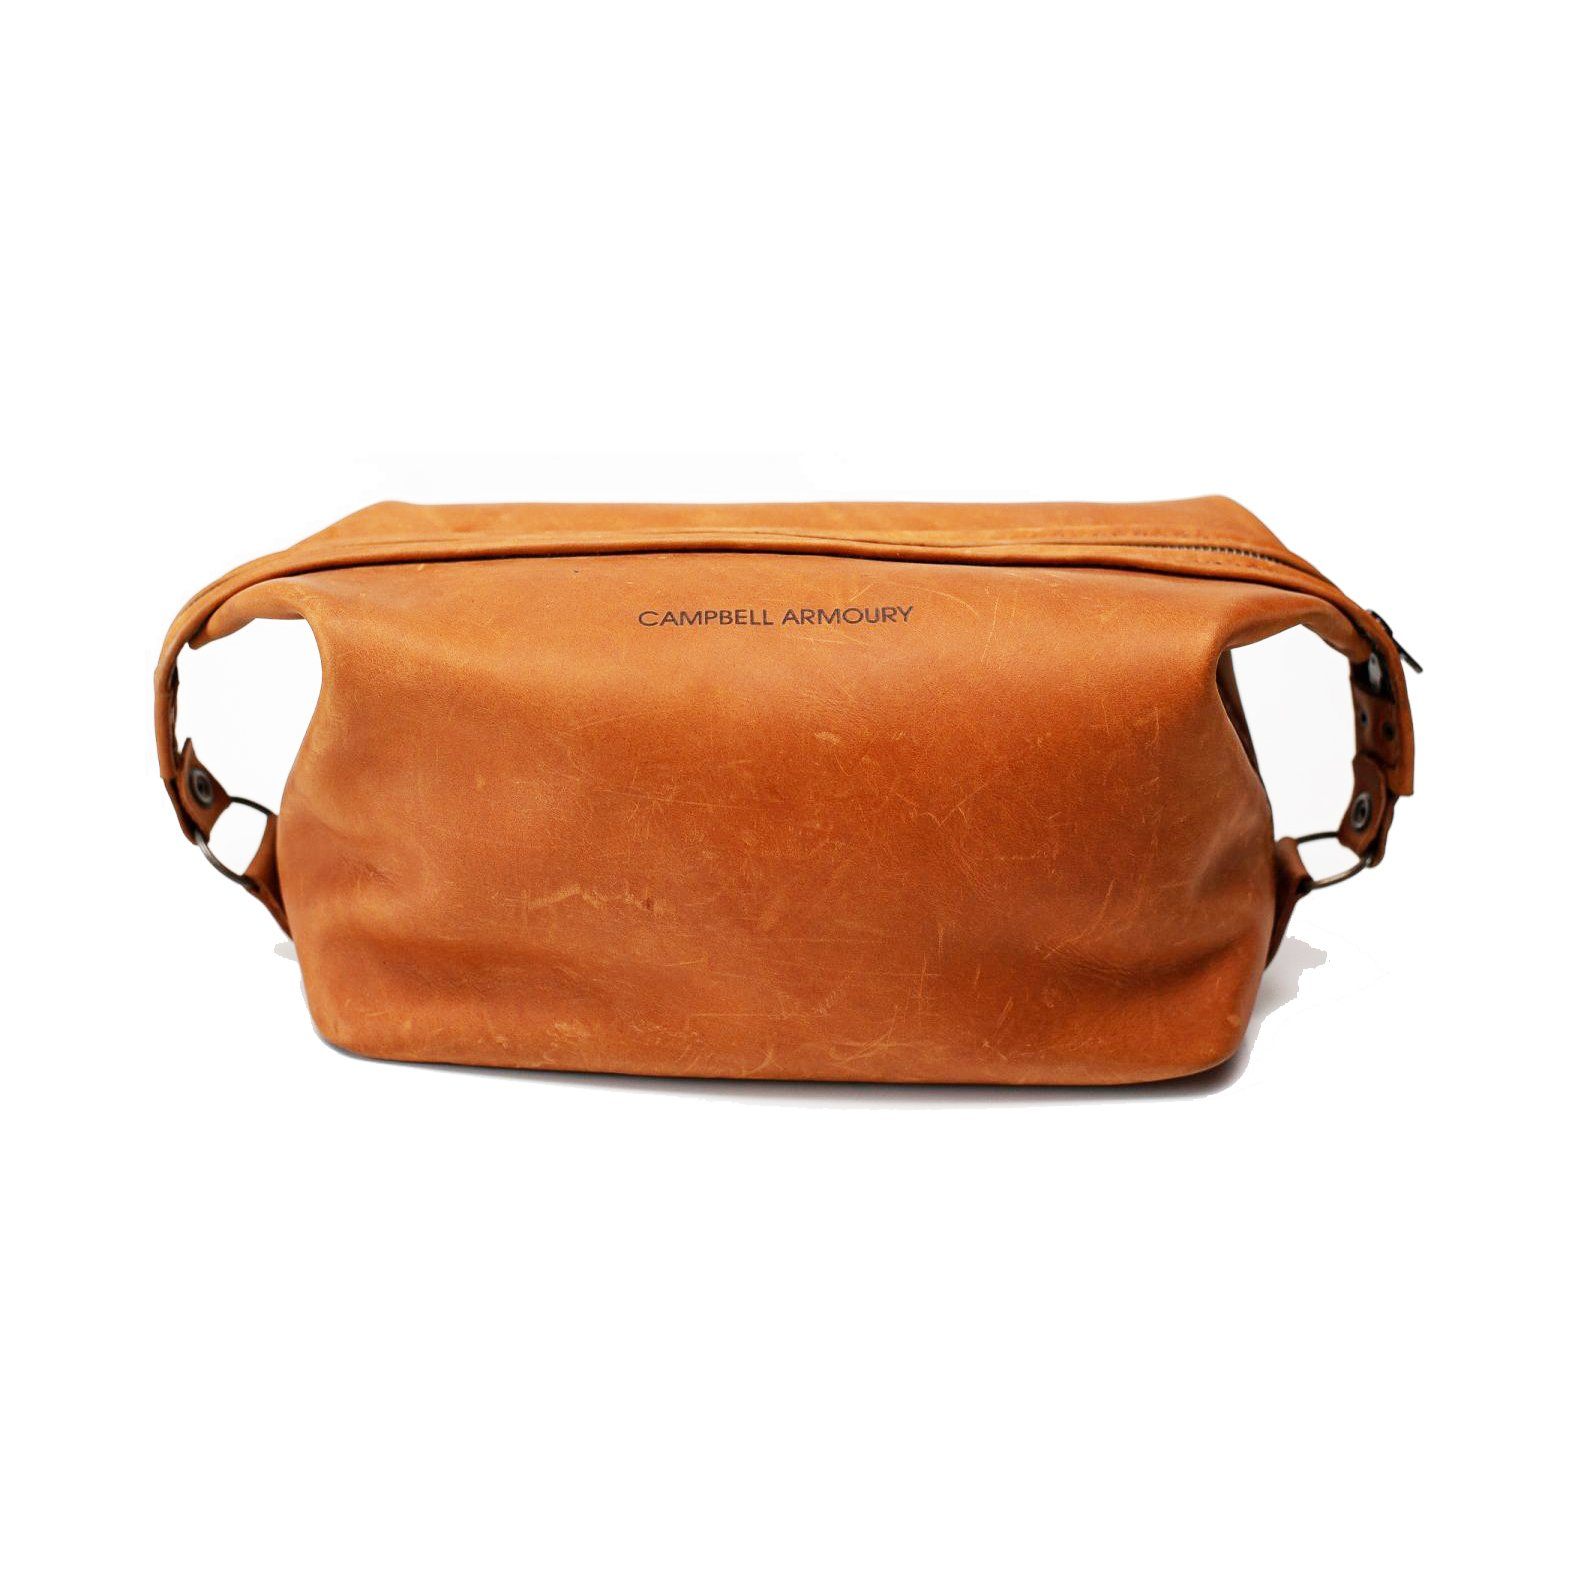 Campbell Armoury Leather Toiletry Bag Bags & Handbags Campbell Armoury tan 